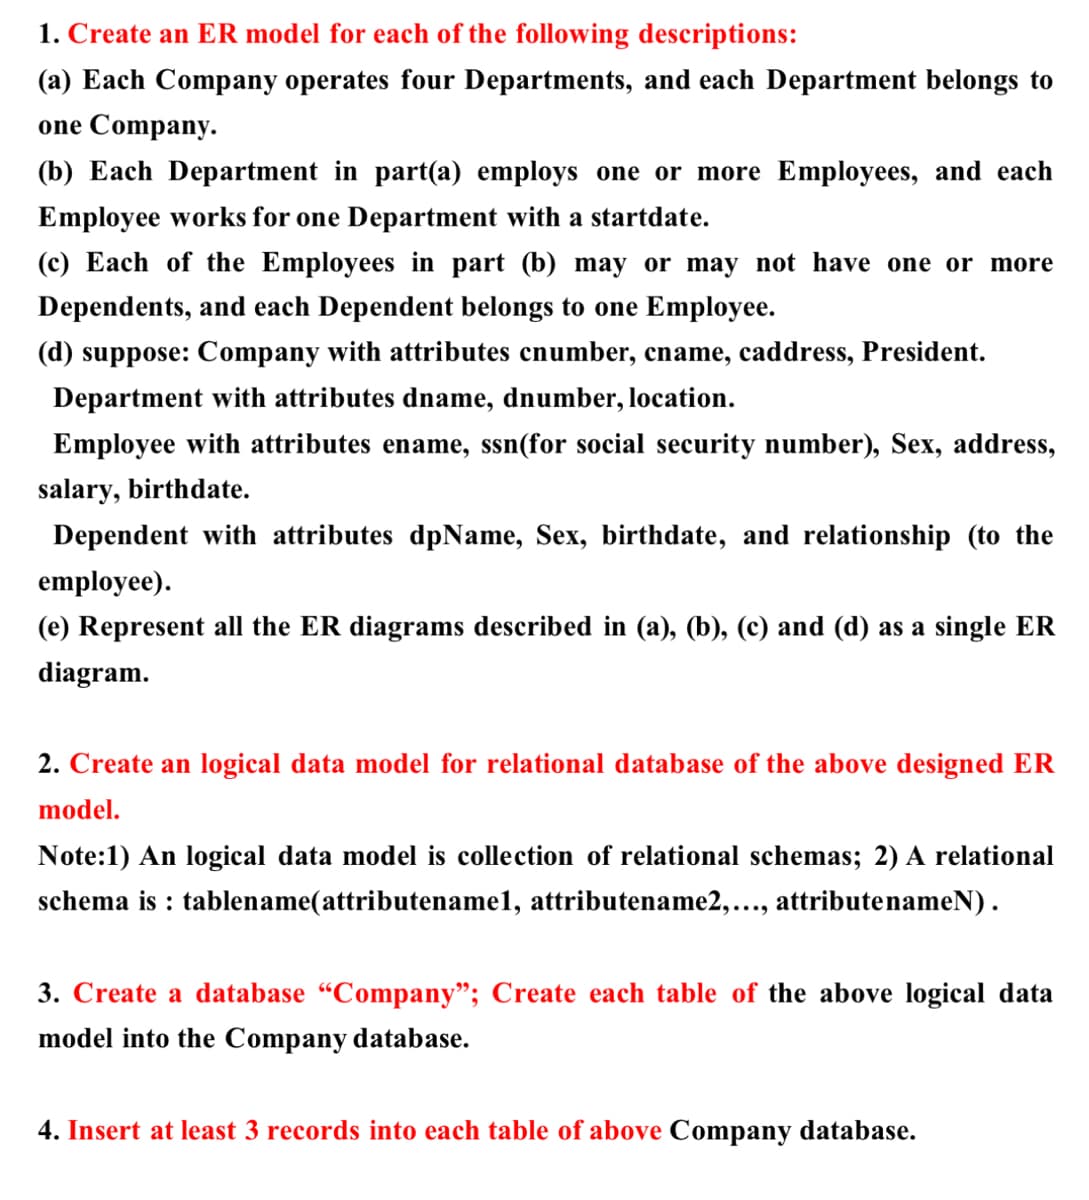 1. Create an ER model for each of the following descriptions:
(a) Each Company operates four Departments, and each Department belongs to
one Company.
(b) Each Department in part(a) employs one or more Employees, and each
Employee works for one Department with a startdate.
(c) Each of the Employees in part (b) may or may not have one or more
Dependents, and each Dependent belongs to one Employee.
(d) suppose: Company with attributes cnumber, cname, caddress, President.
Department with attributes dname, dnumber, location.
Employee with attributes ename, ssn(for social security number), Sex, address,
salary, birthdate.
Dependent with attributes dpName, Sex, birthdate, and relationship (to the
employee).
(e) Represent all the ER diagrams described in (a), (b), (c) and (d) as a single ER
diagram.
2. Create an logical data model for relational database of the above designed ER
model.
Note:1) An logical data model is collection of relational schemas; 2) A relational
schema is : tablename(attributename1, attributename2,..., attributenameN).
3. Create a database "Company"; Create each table of the above logical data
model into the Company database.
4. Insert at least 3 records into each table of above Company database.
